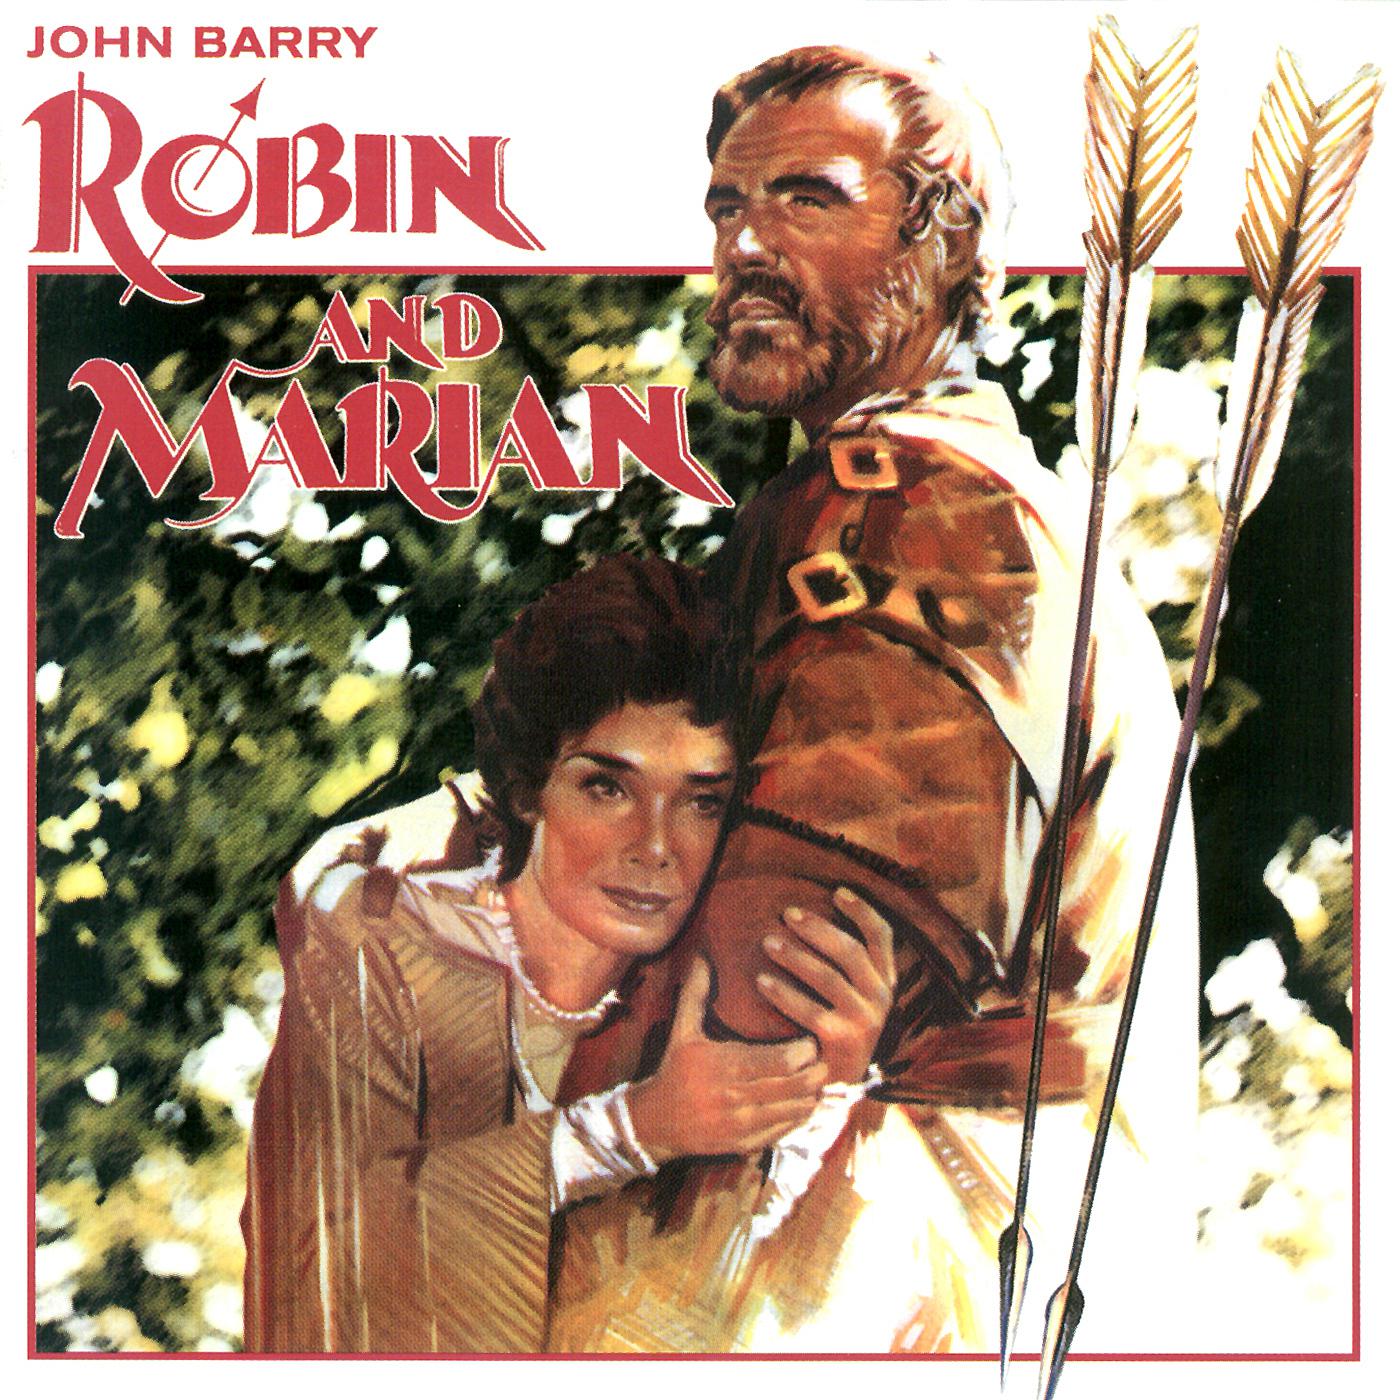 Second Love Theme (From "Robin and Marian")